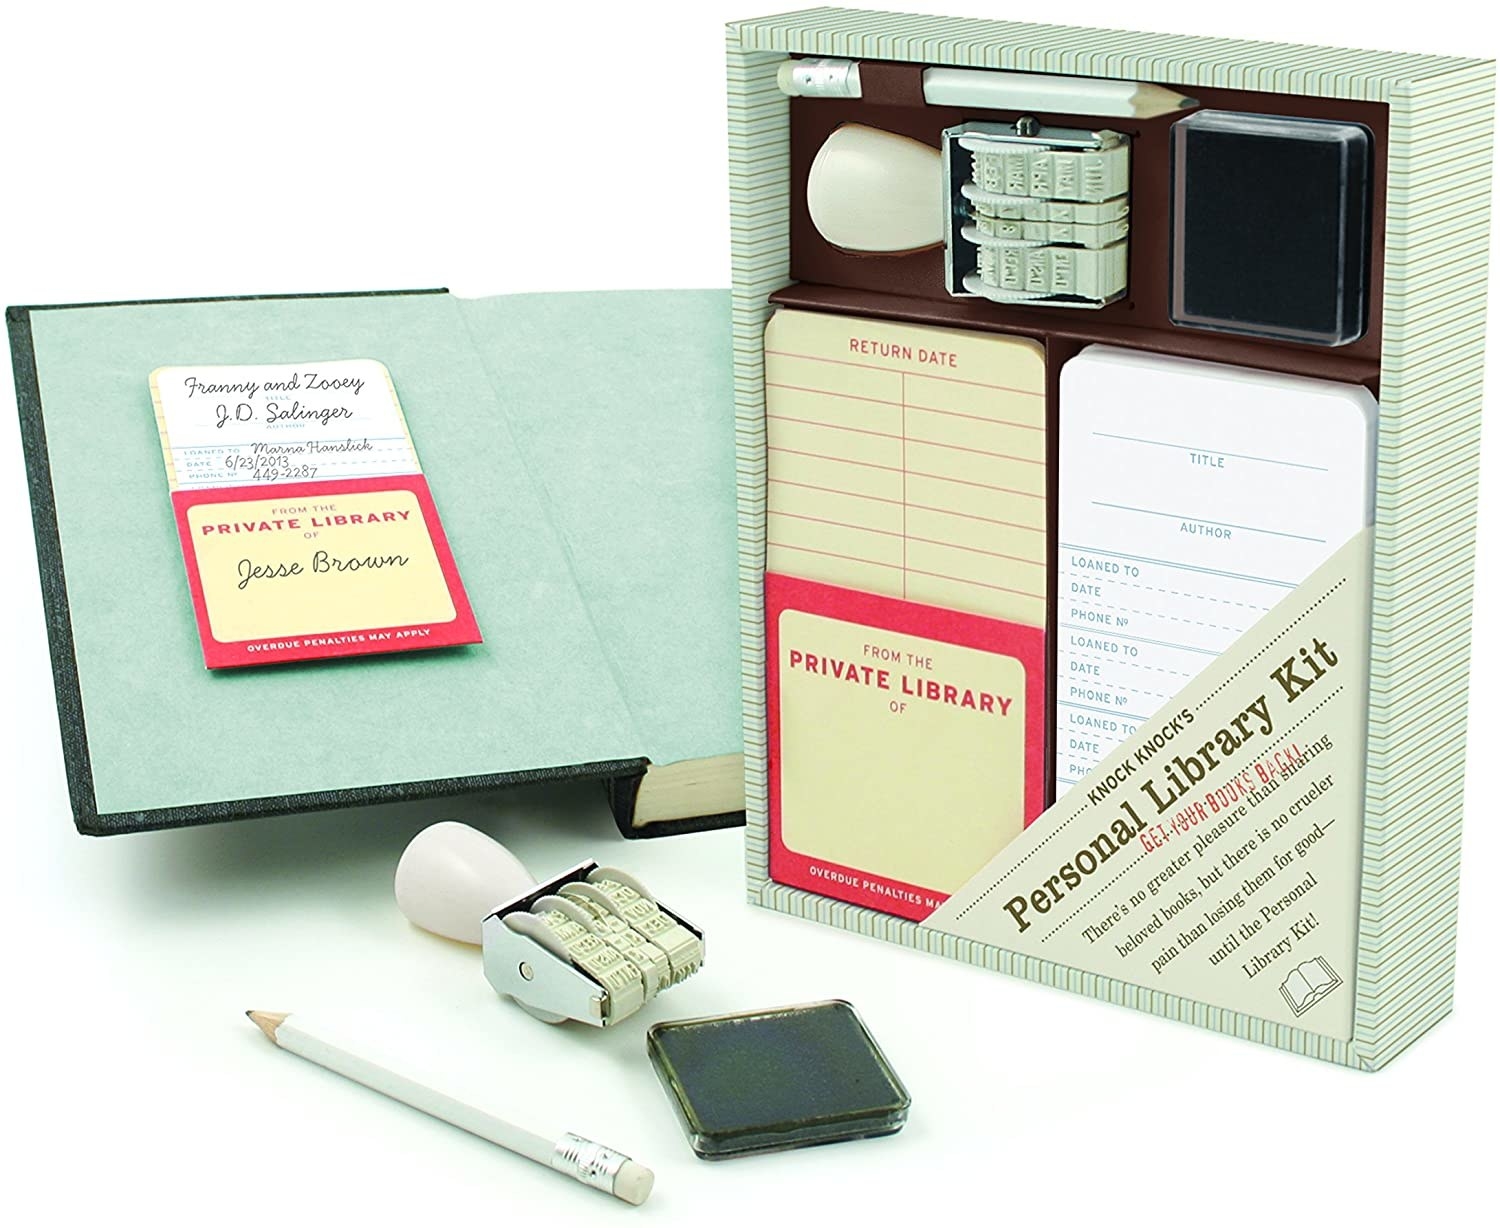 the kit sitting next to an open book with one of the pockets attached to the inside cover with a library card inside, a date stamp, and an ink pad